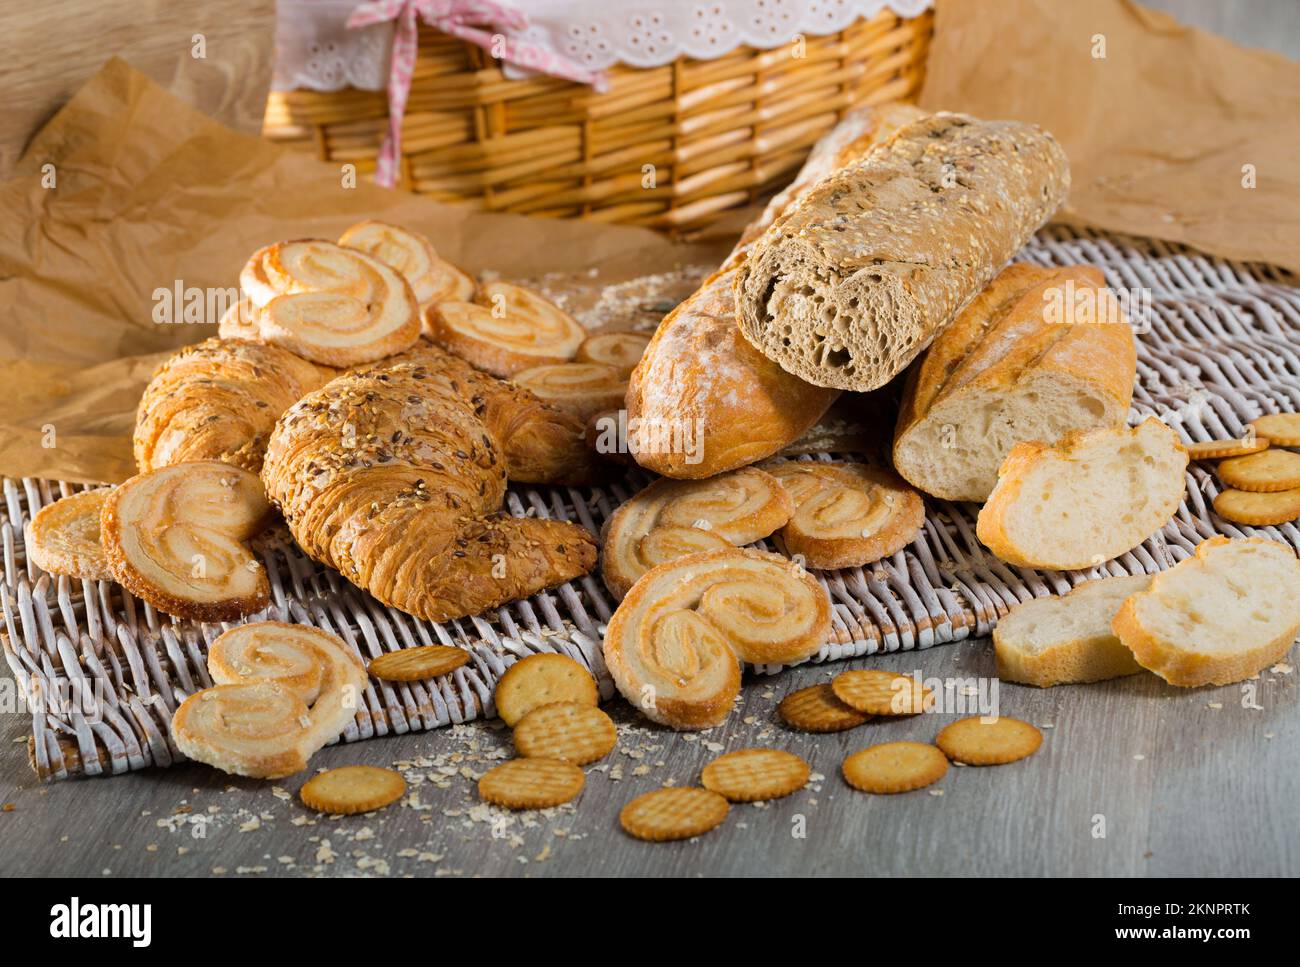 Various bakery products on rattan mat Stock Photo